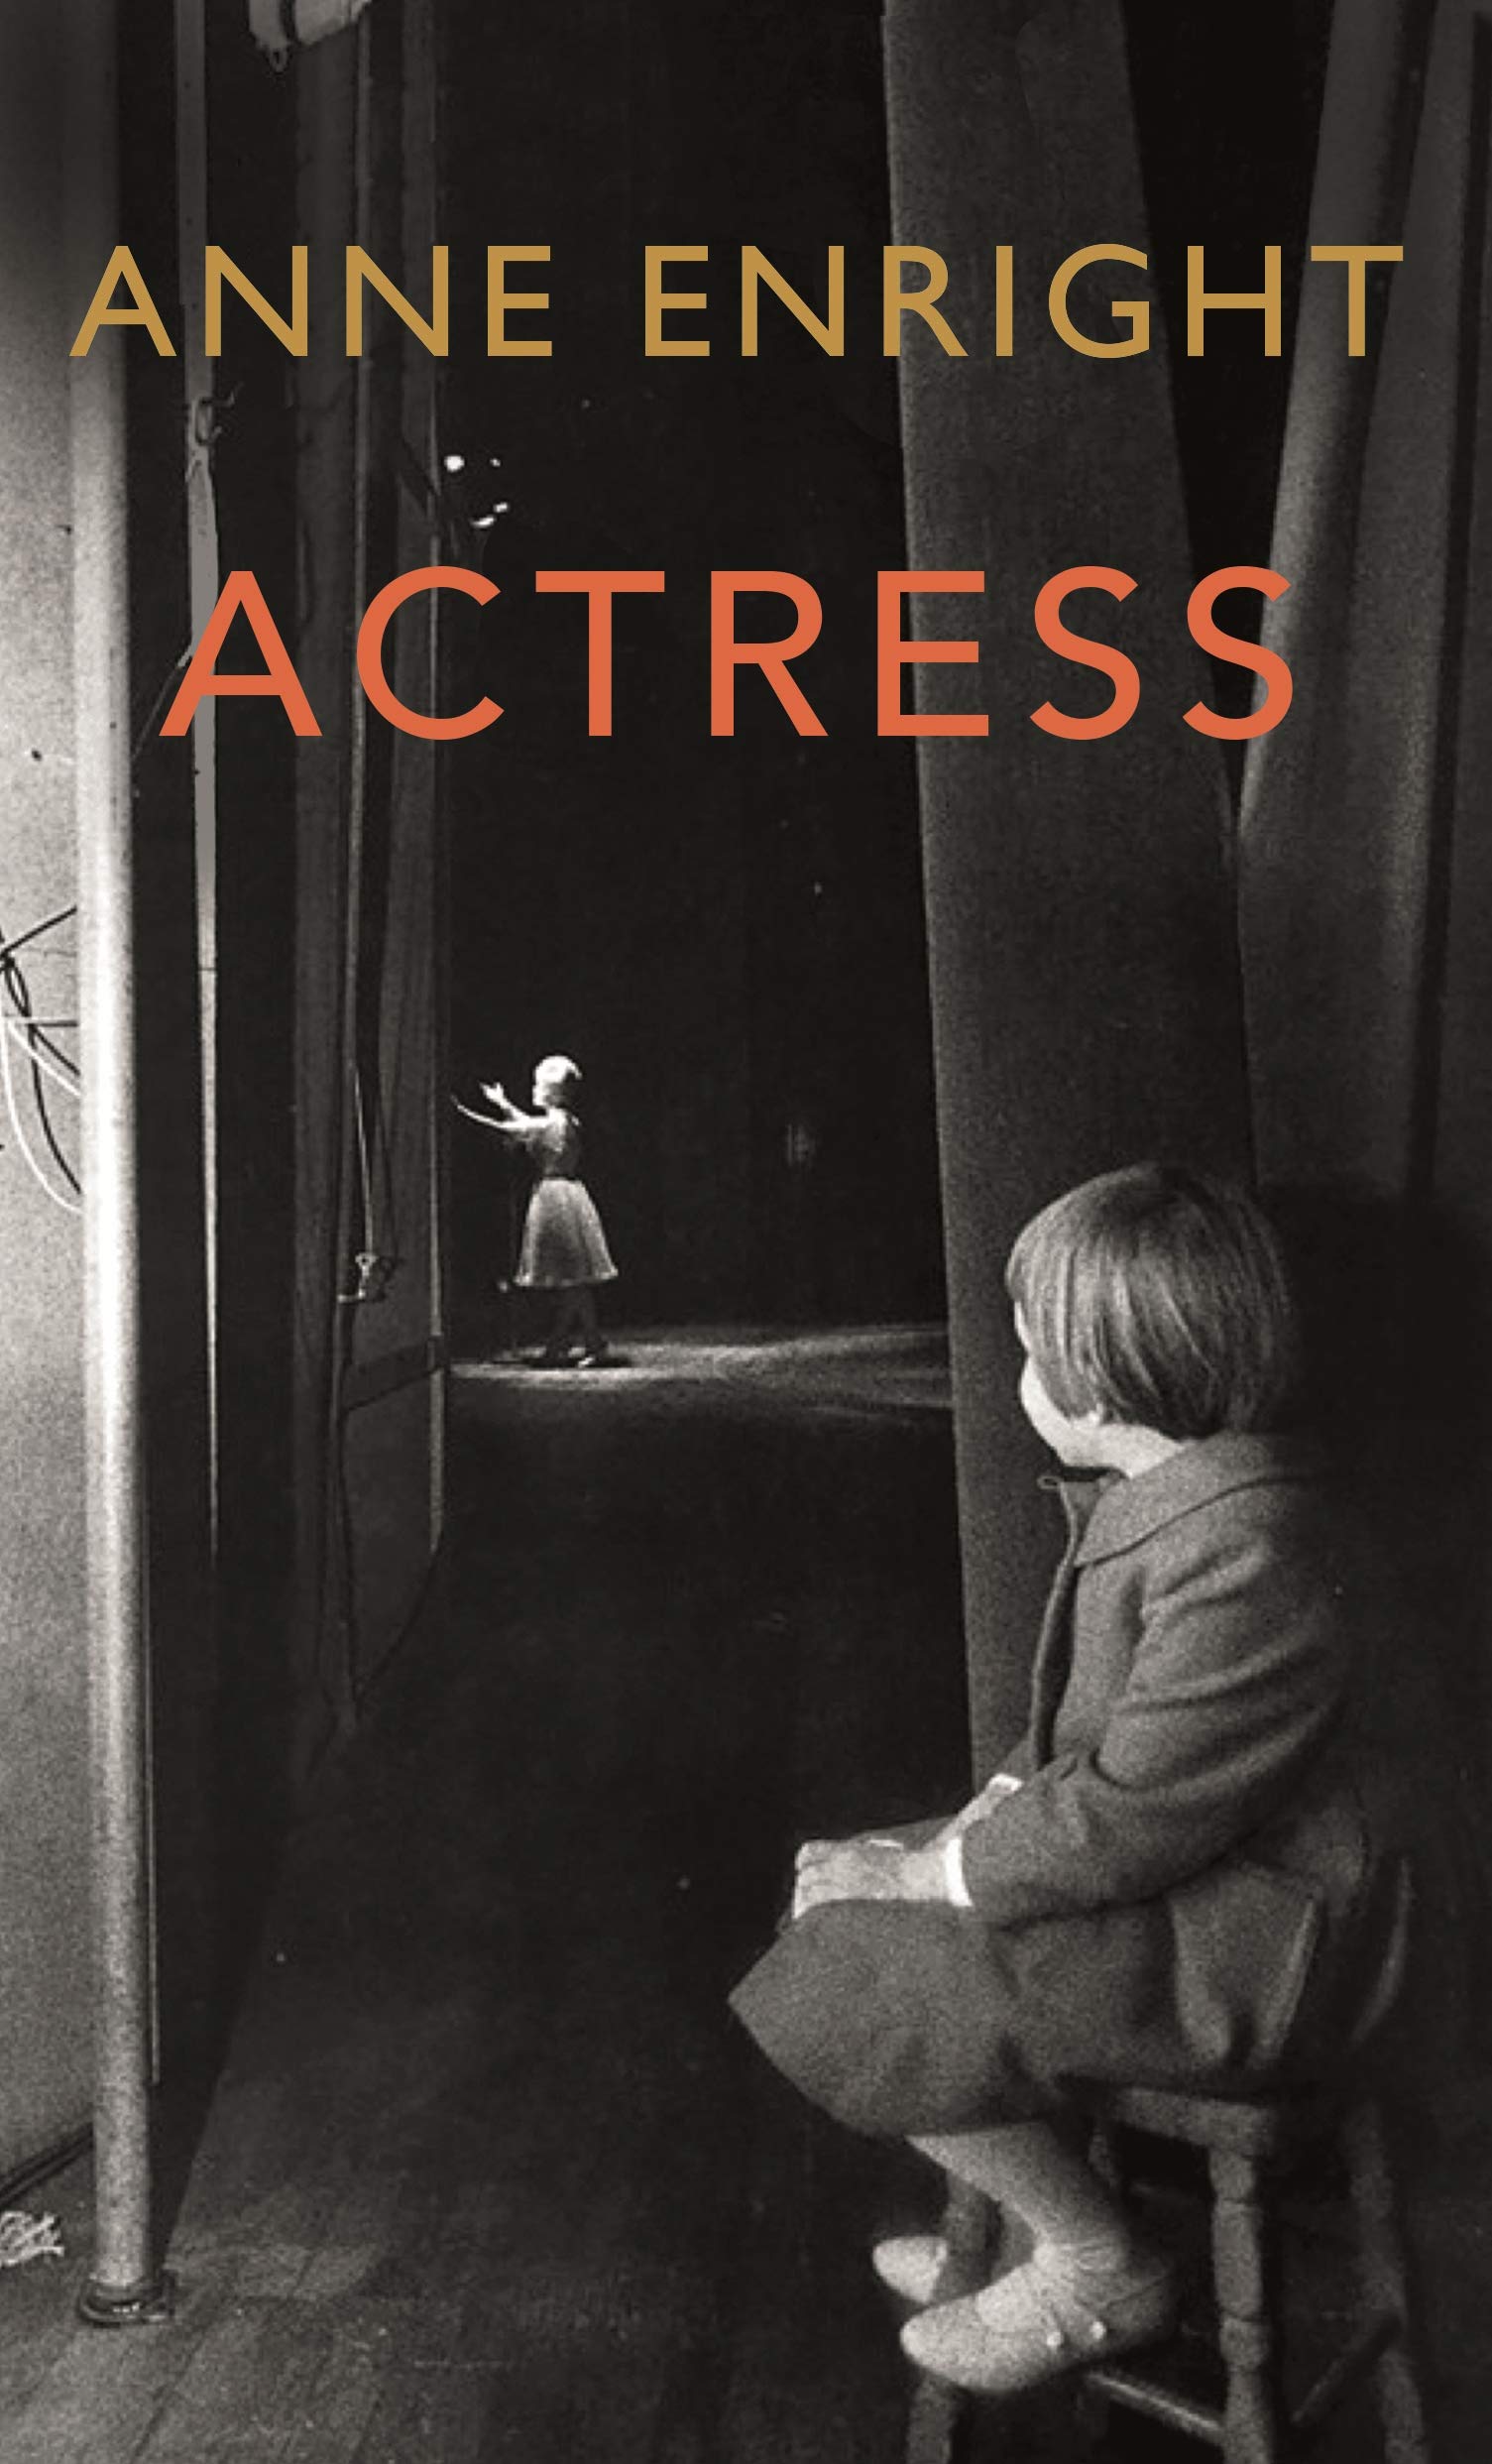 Anne Enright’s ‘Actress’ (part 1): finding a mother